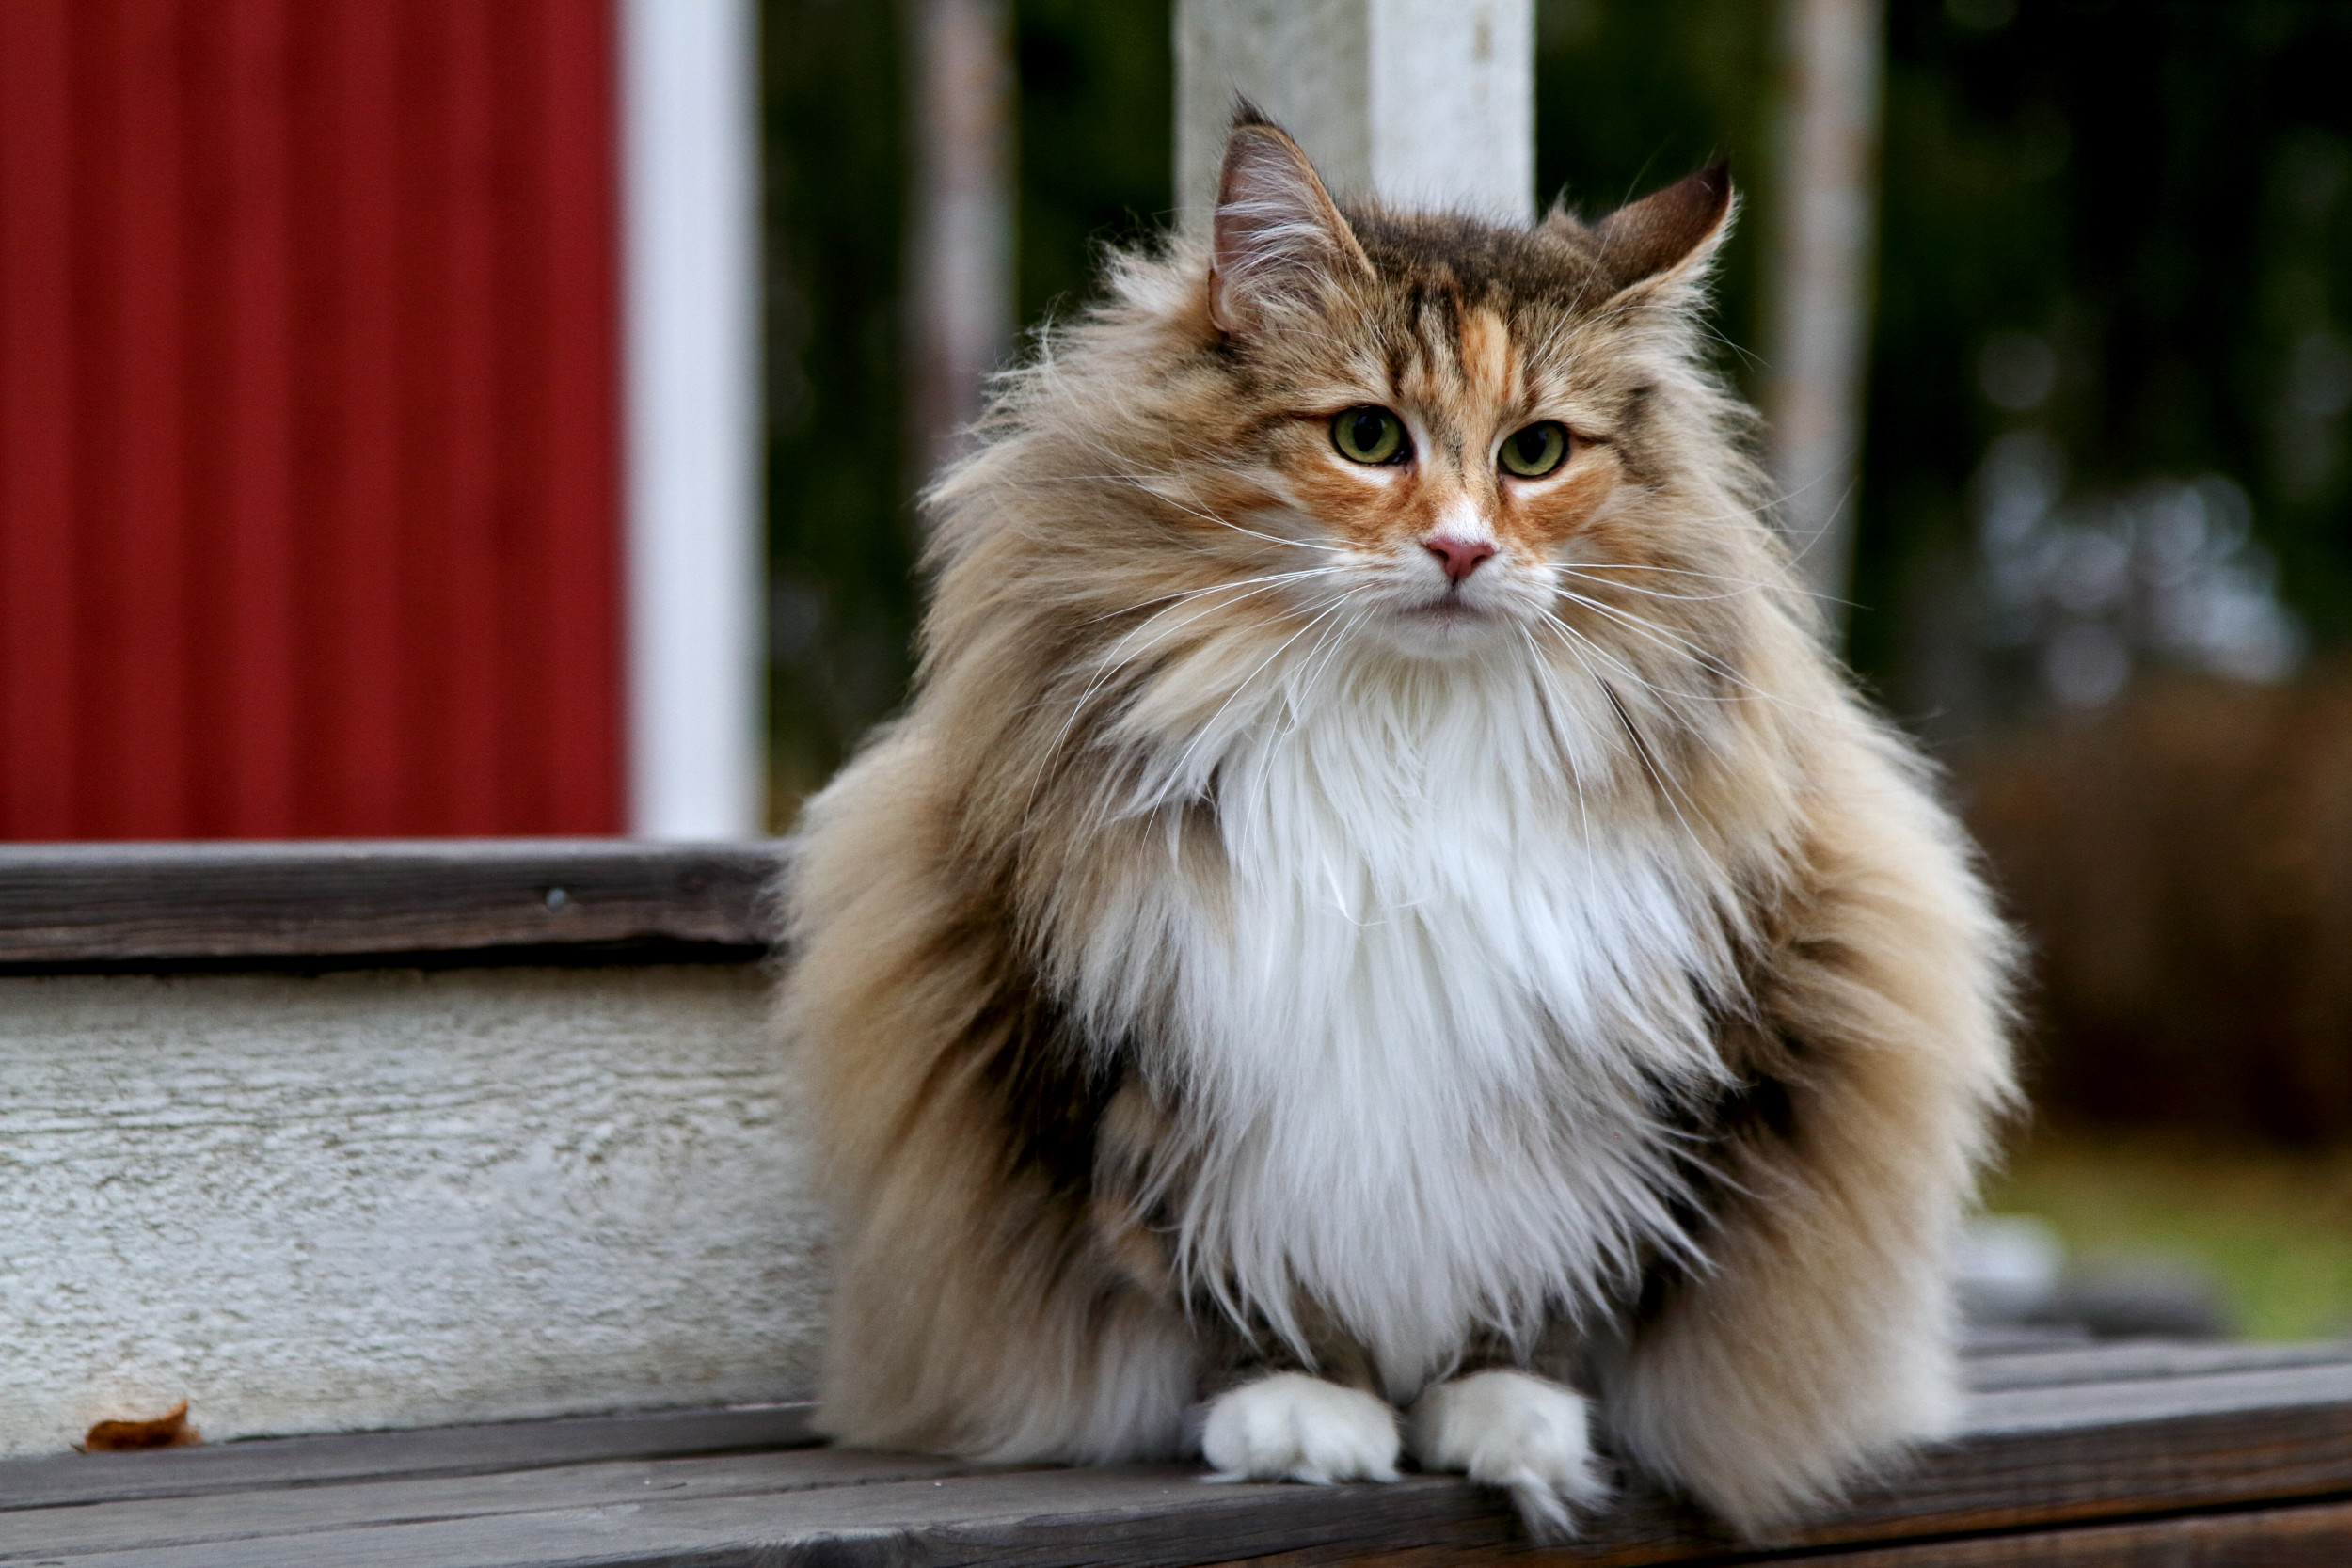 25 Cat Breeds With the Longest Life Spans